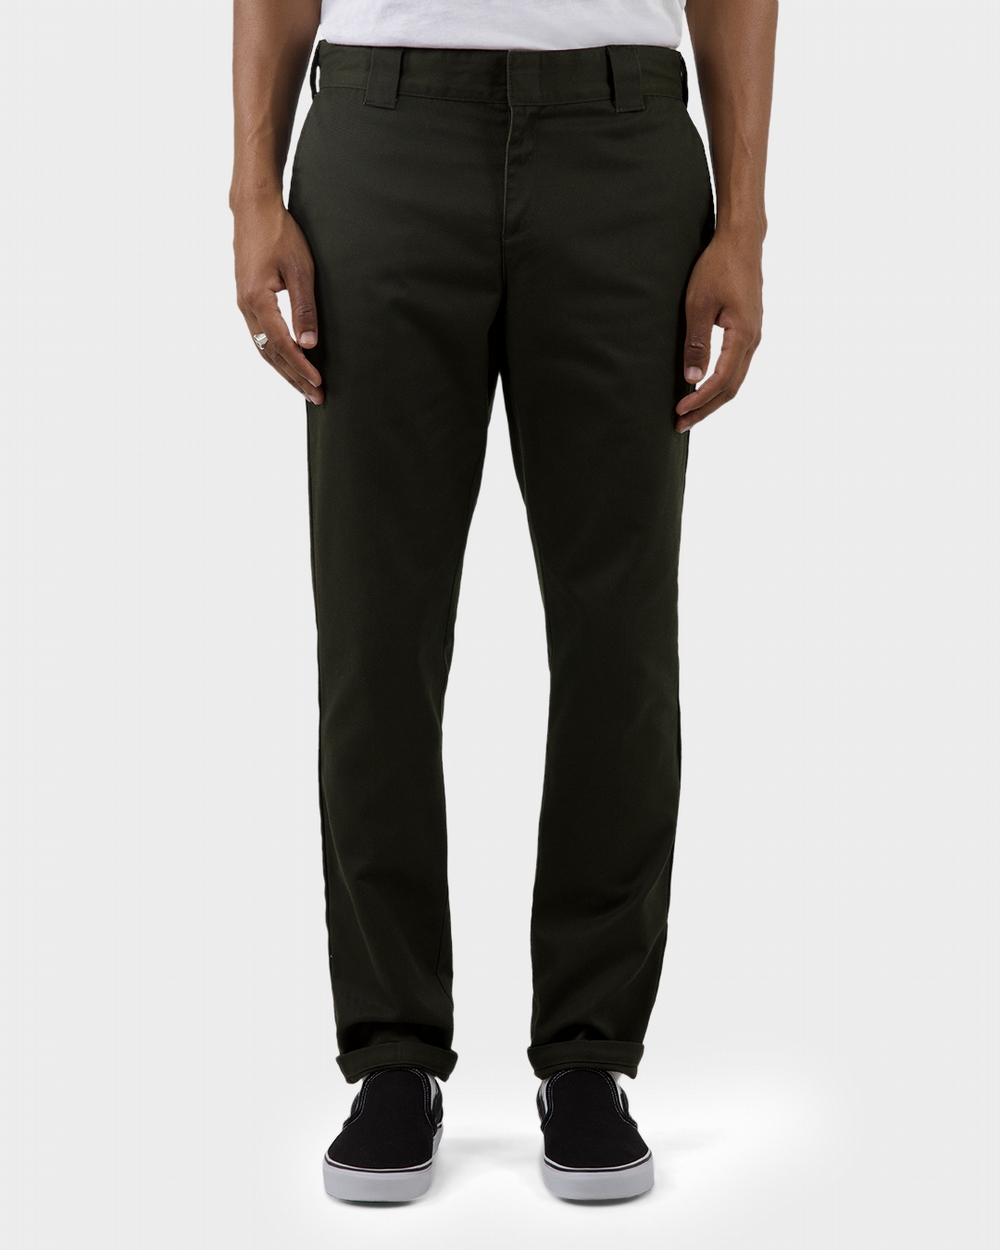 Discover 79+ dark olive green trousers best - in.duhocakina